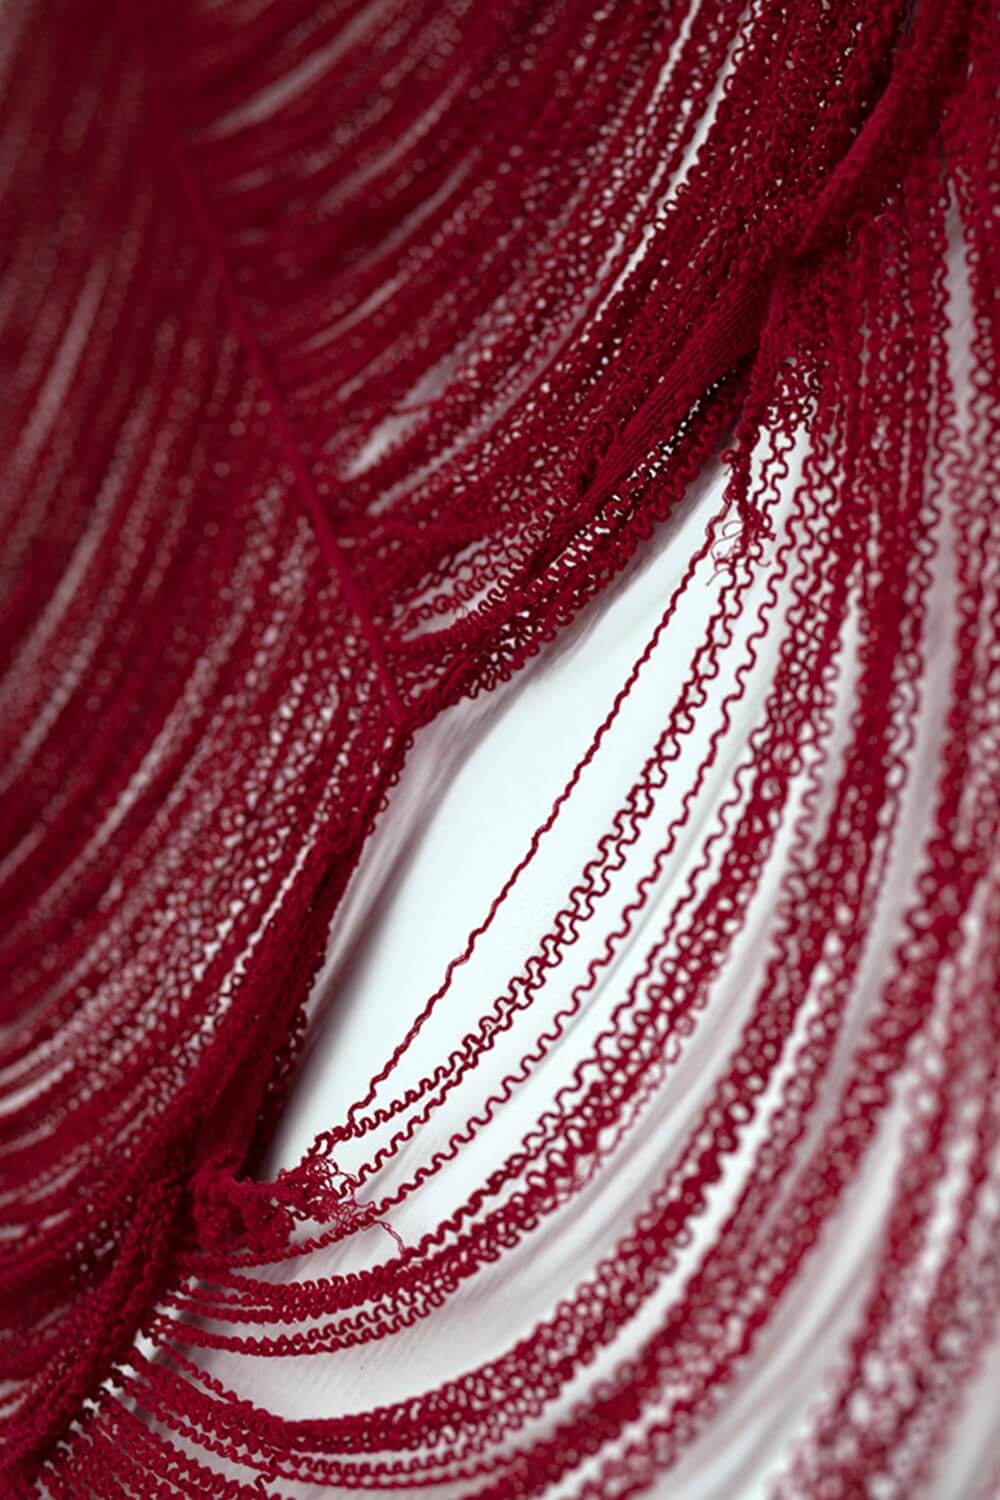 Picture of textile up close